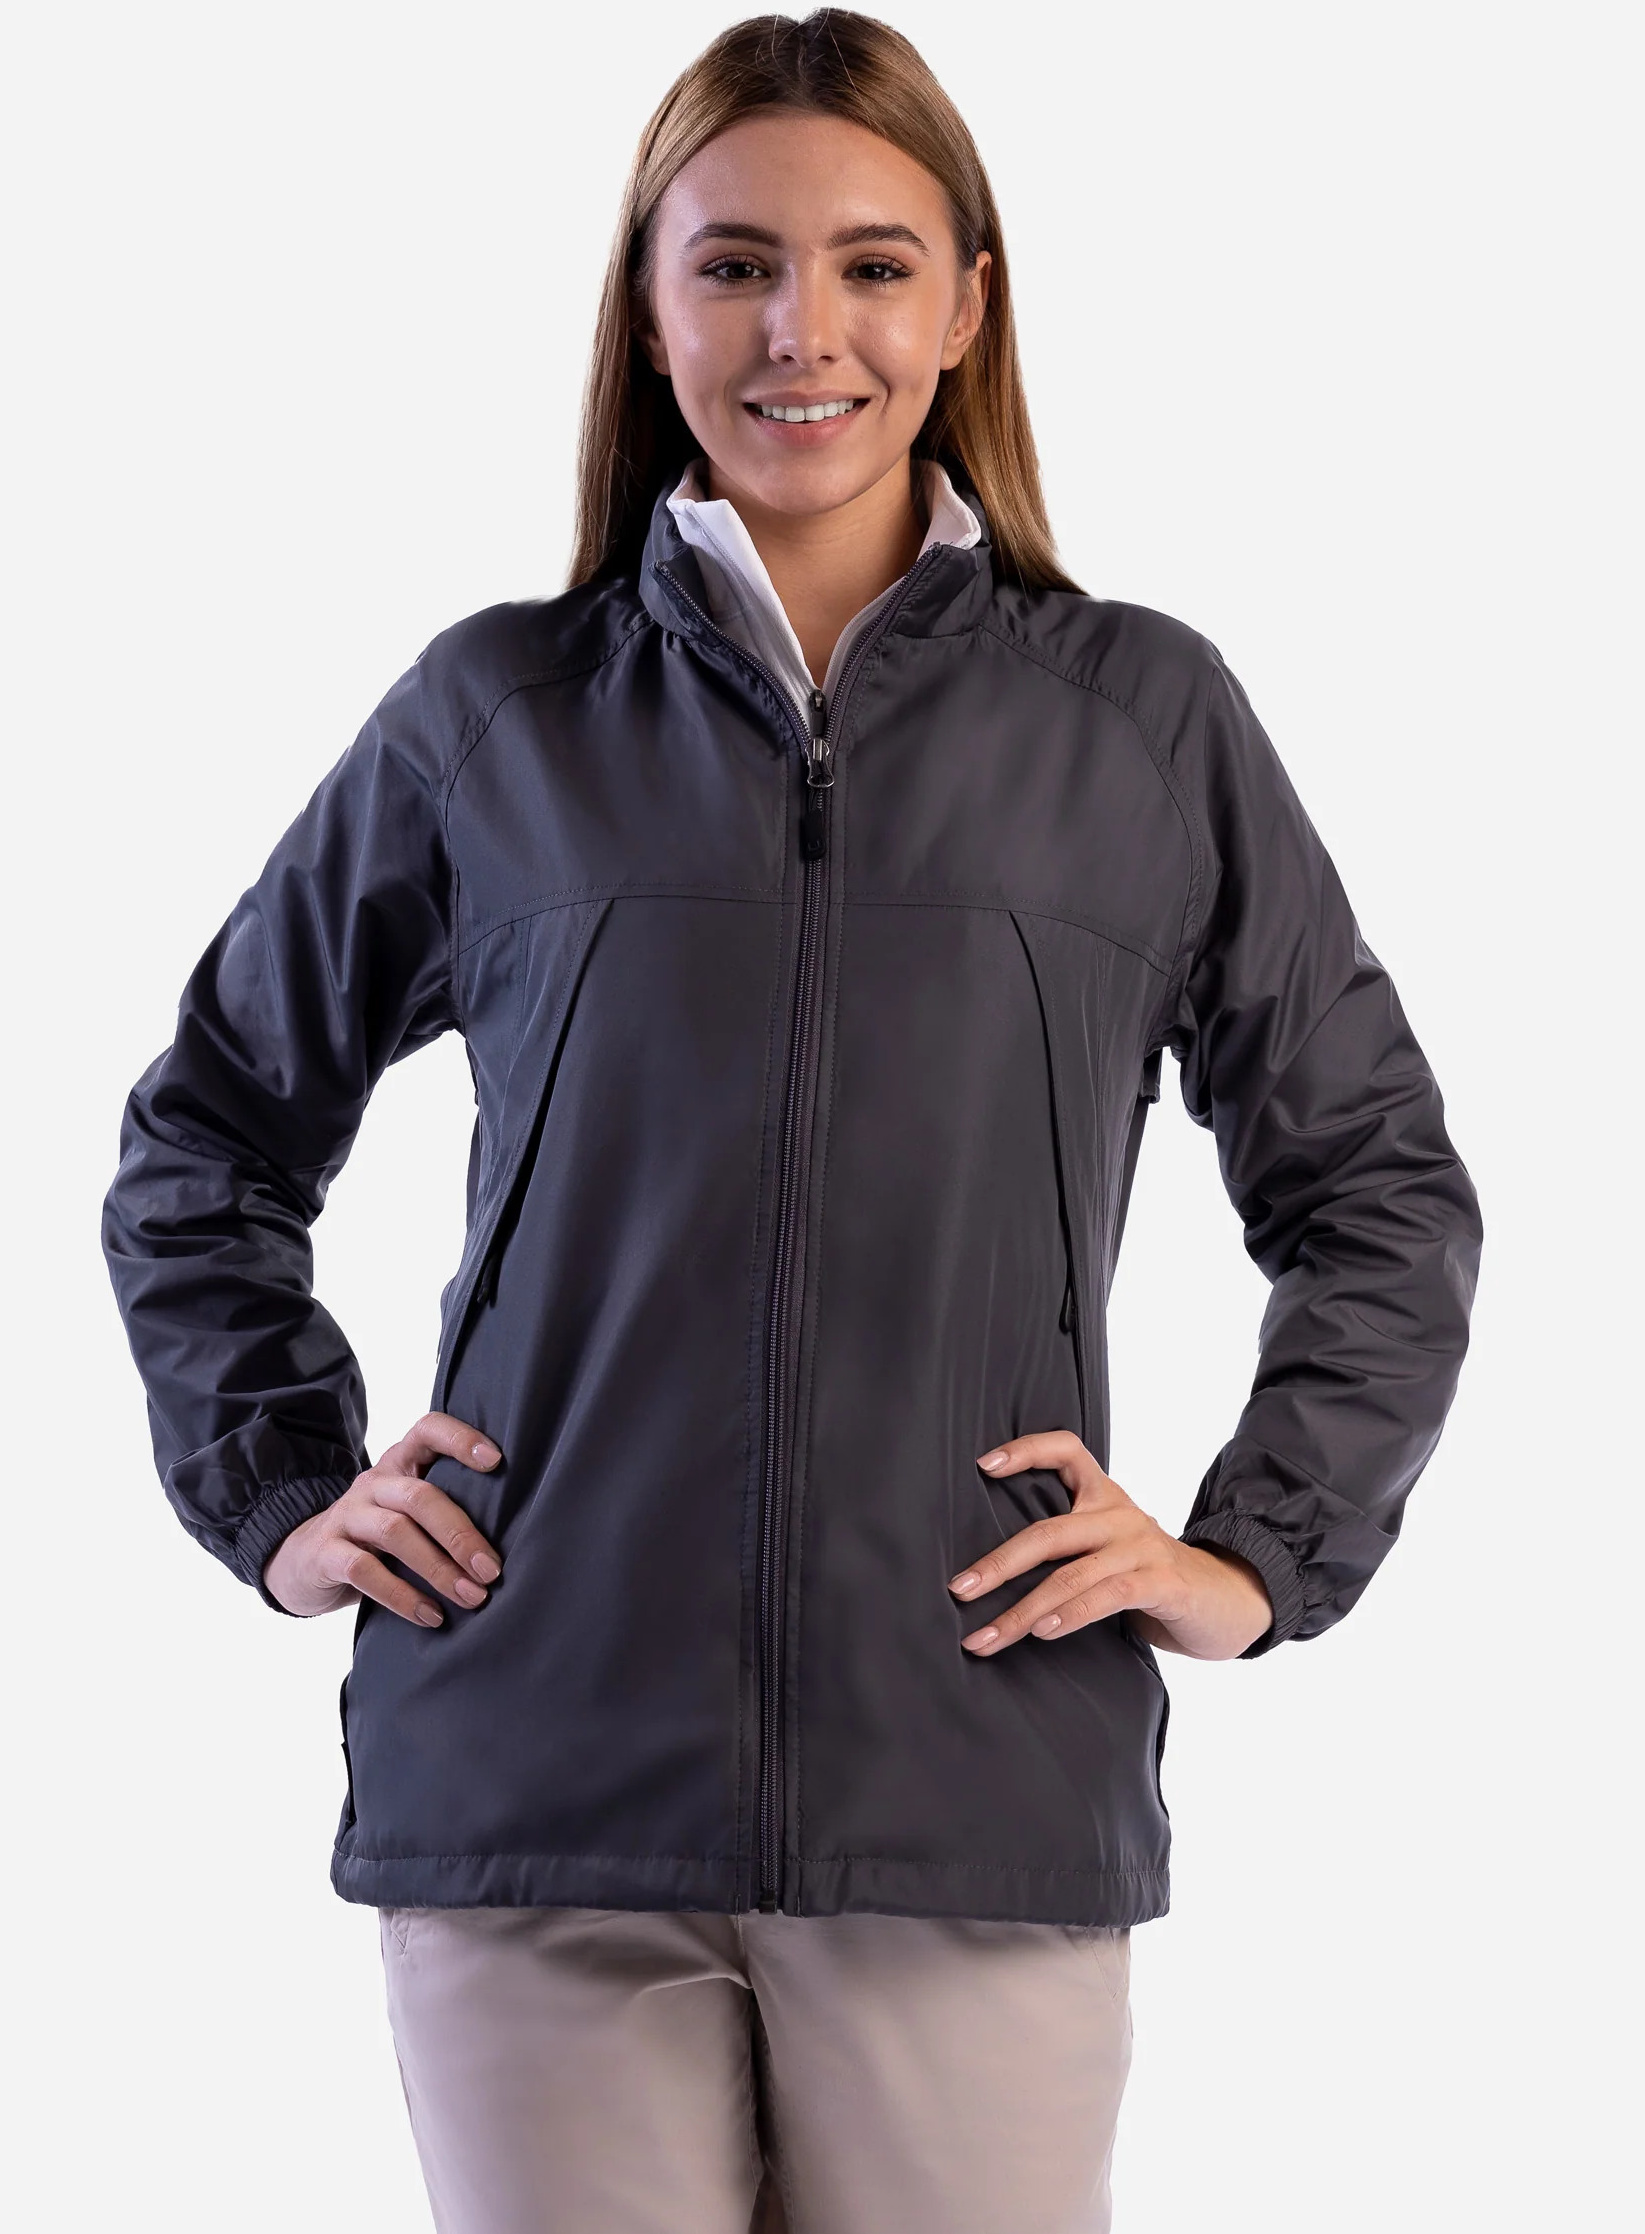 Hidden Pockets and Security with Scottevest Clothing - Clever